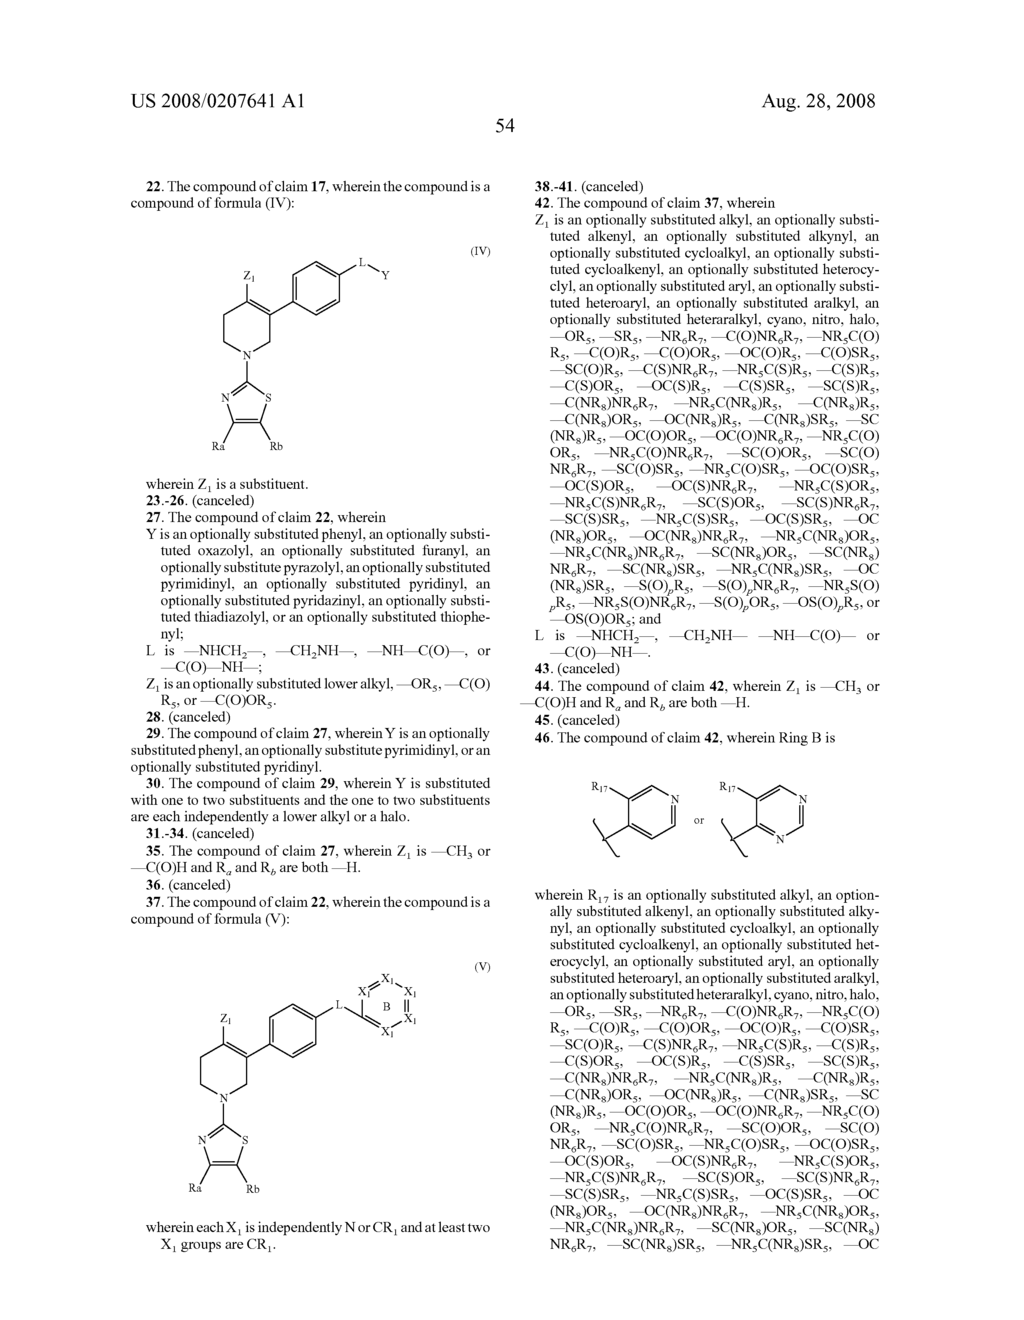 CYCLOHEXENYL-ARYL COMPOUNDS FOR INFLAMMATION AND IMMUNE-RELATED USES - diagram, schematic, and image 55